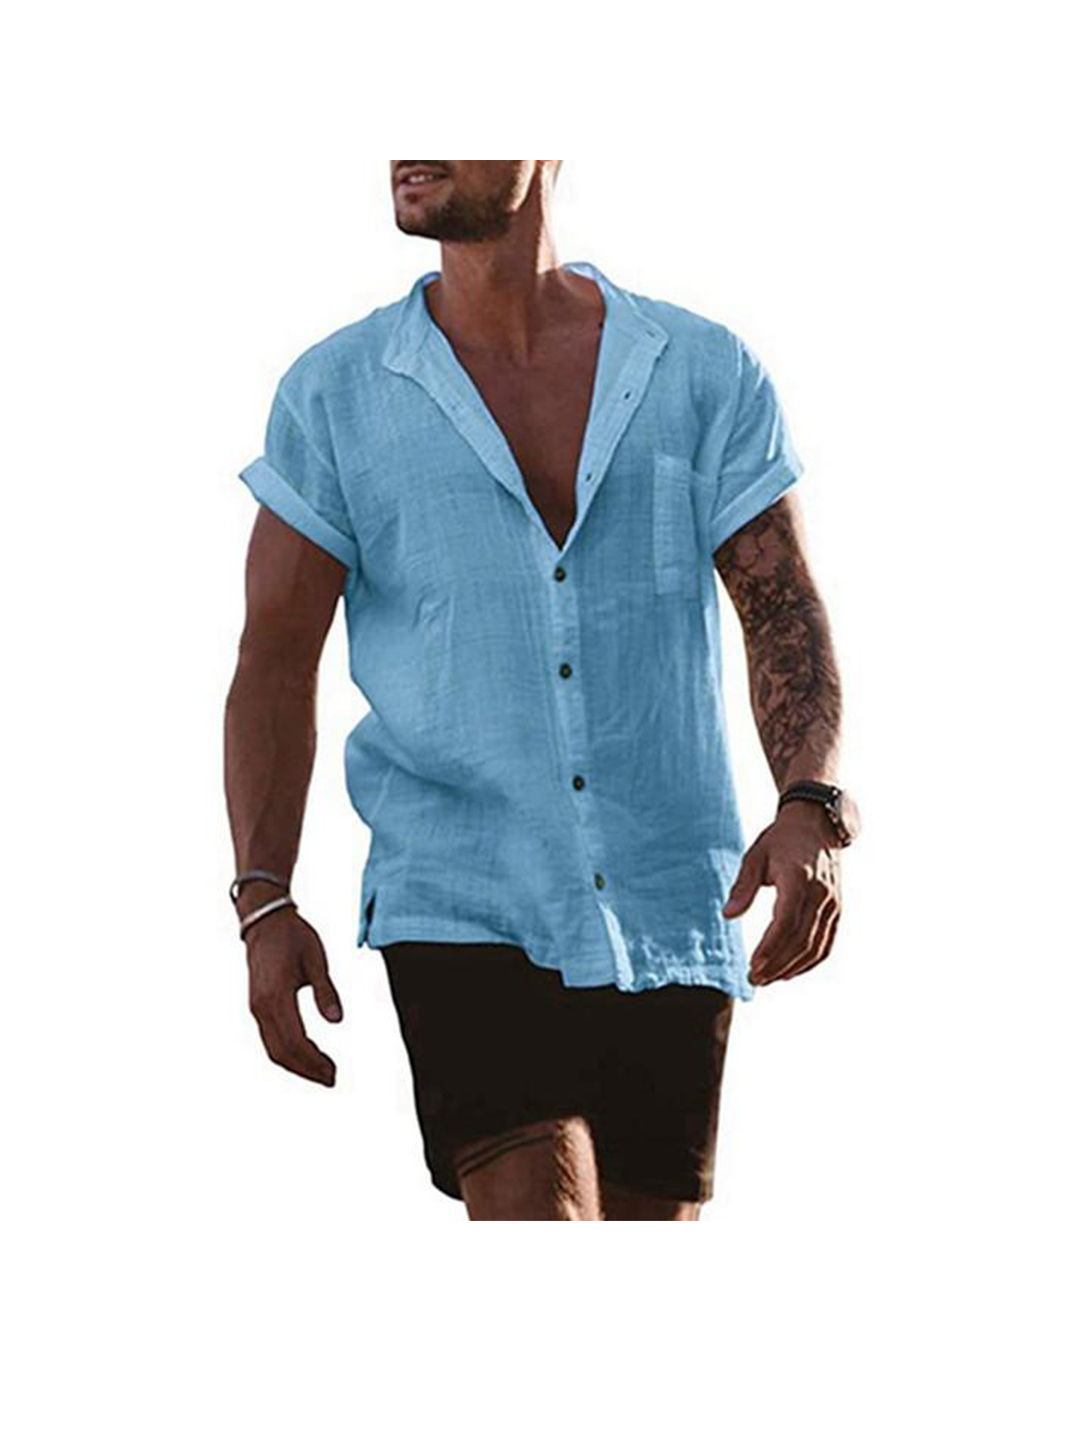 Men's Buford Solid Color Patch Pocket Casual Shirt-poisonstreetwear.com